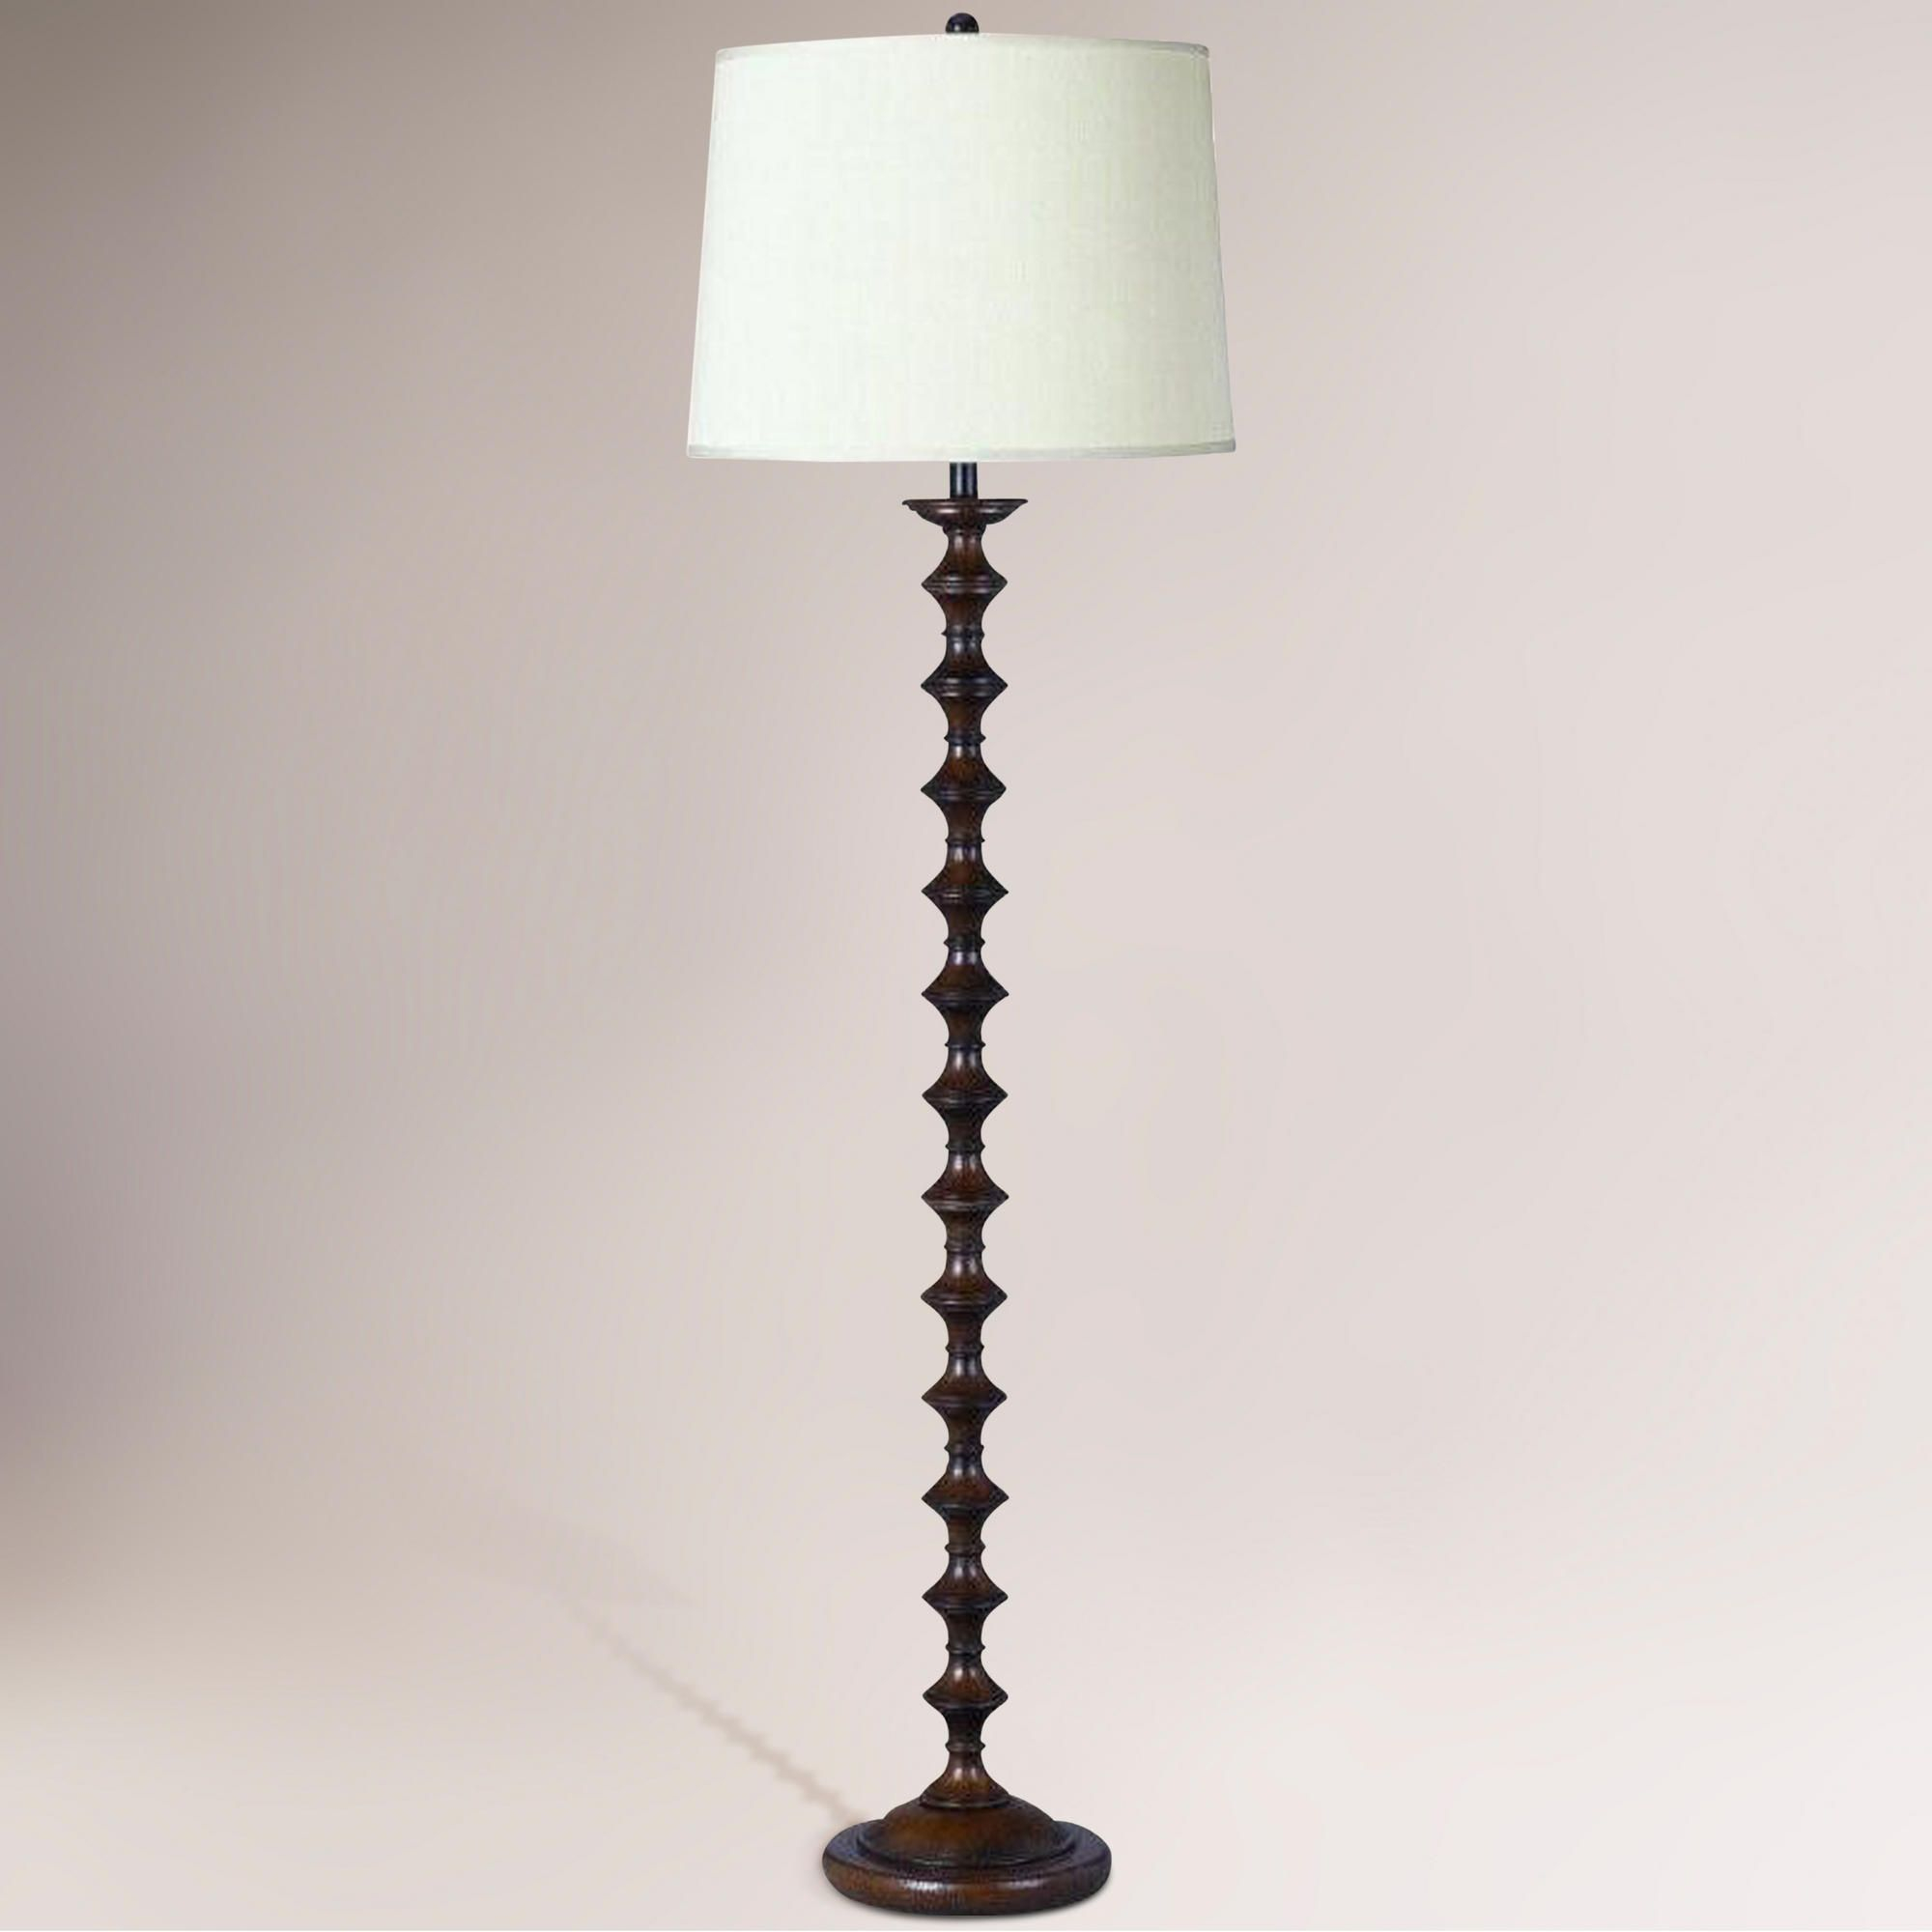 Spindle Floor Lamp Spindle Floor Lamp World Market within proportions 2000 X 2000